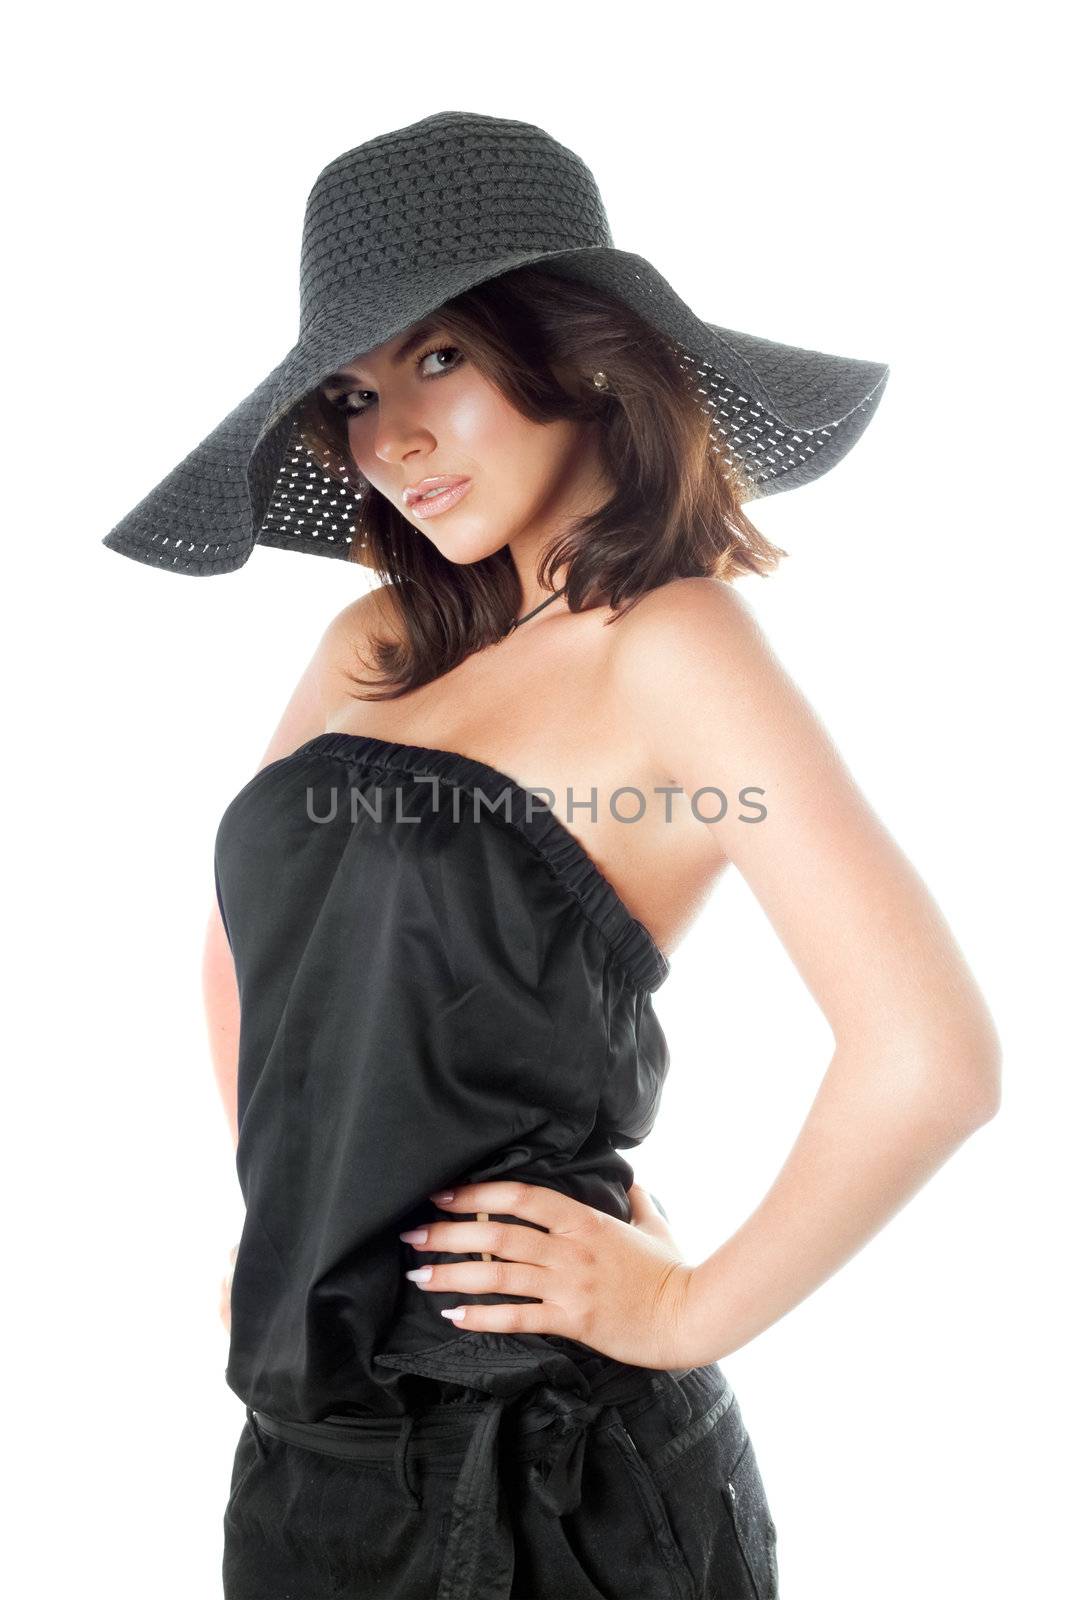 Young woman posing in black hat and dress. Isolated on white